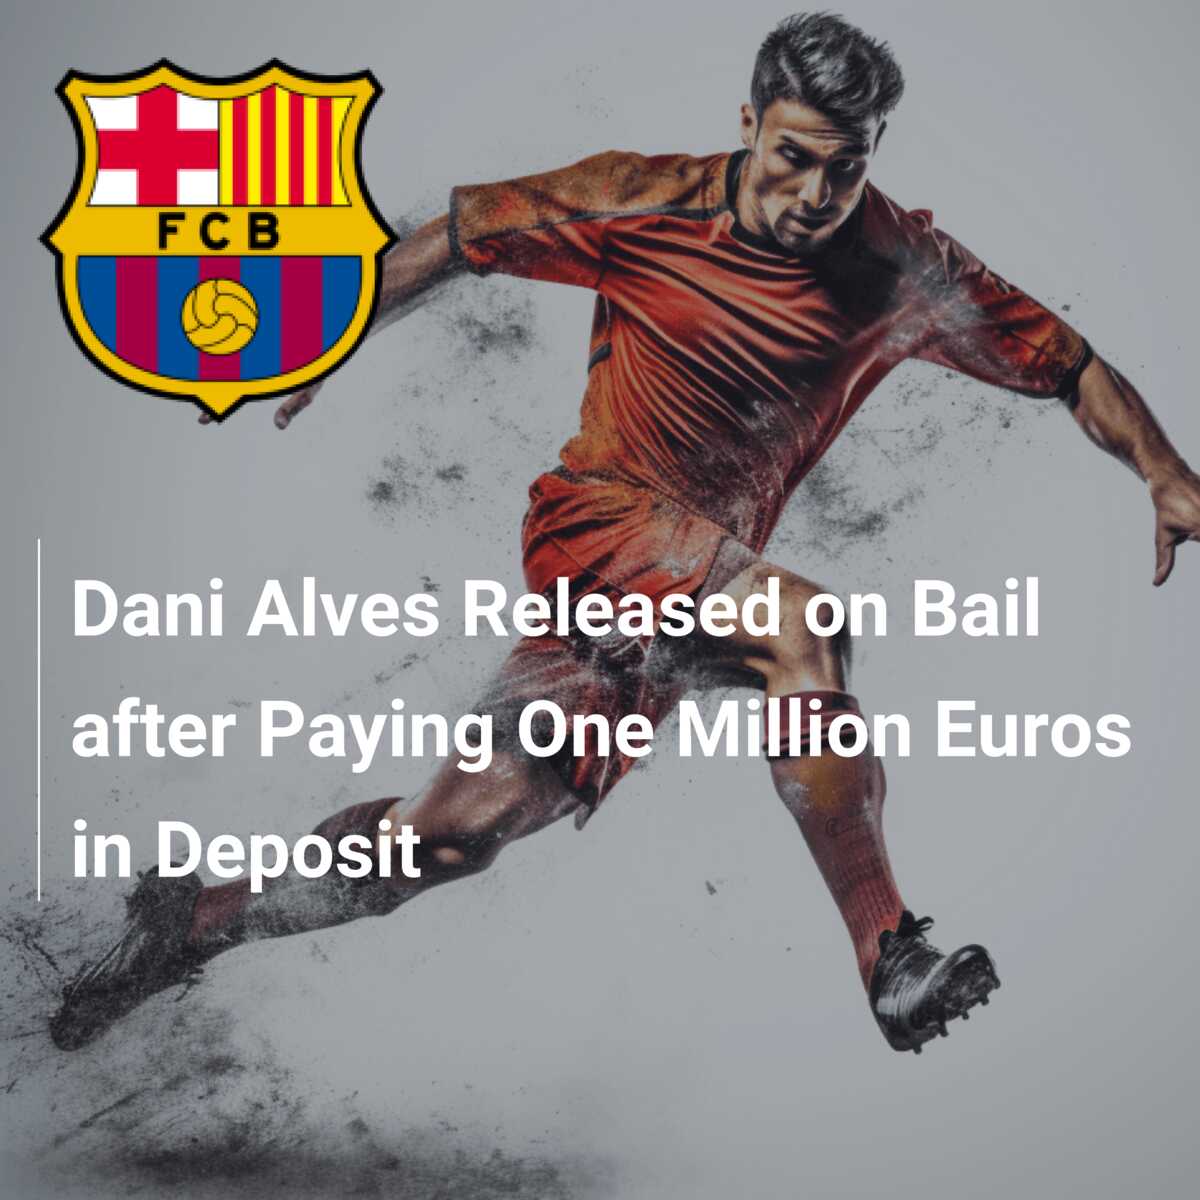 Dani Alves has been granted release from prison on bail, priced at €1 , Dani Alves